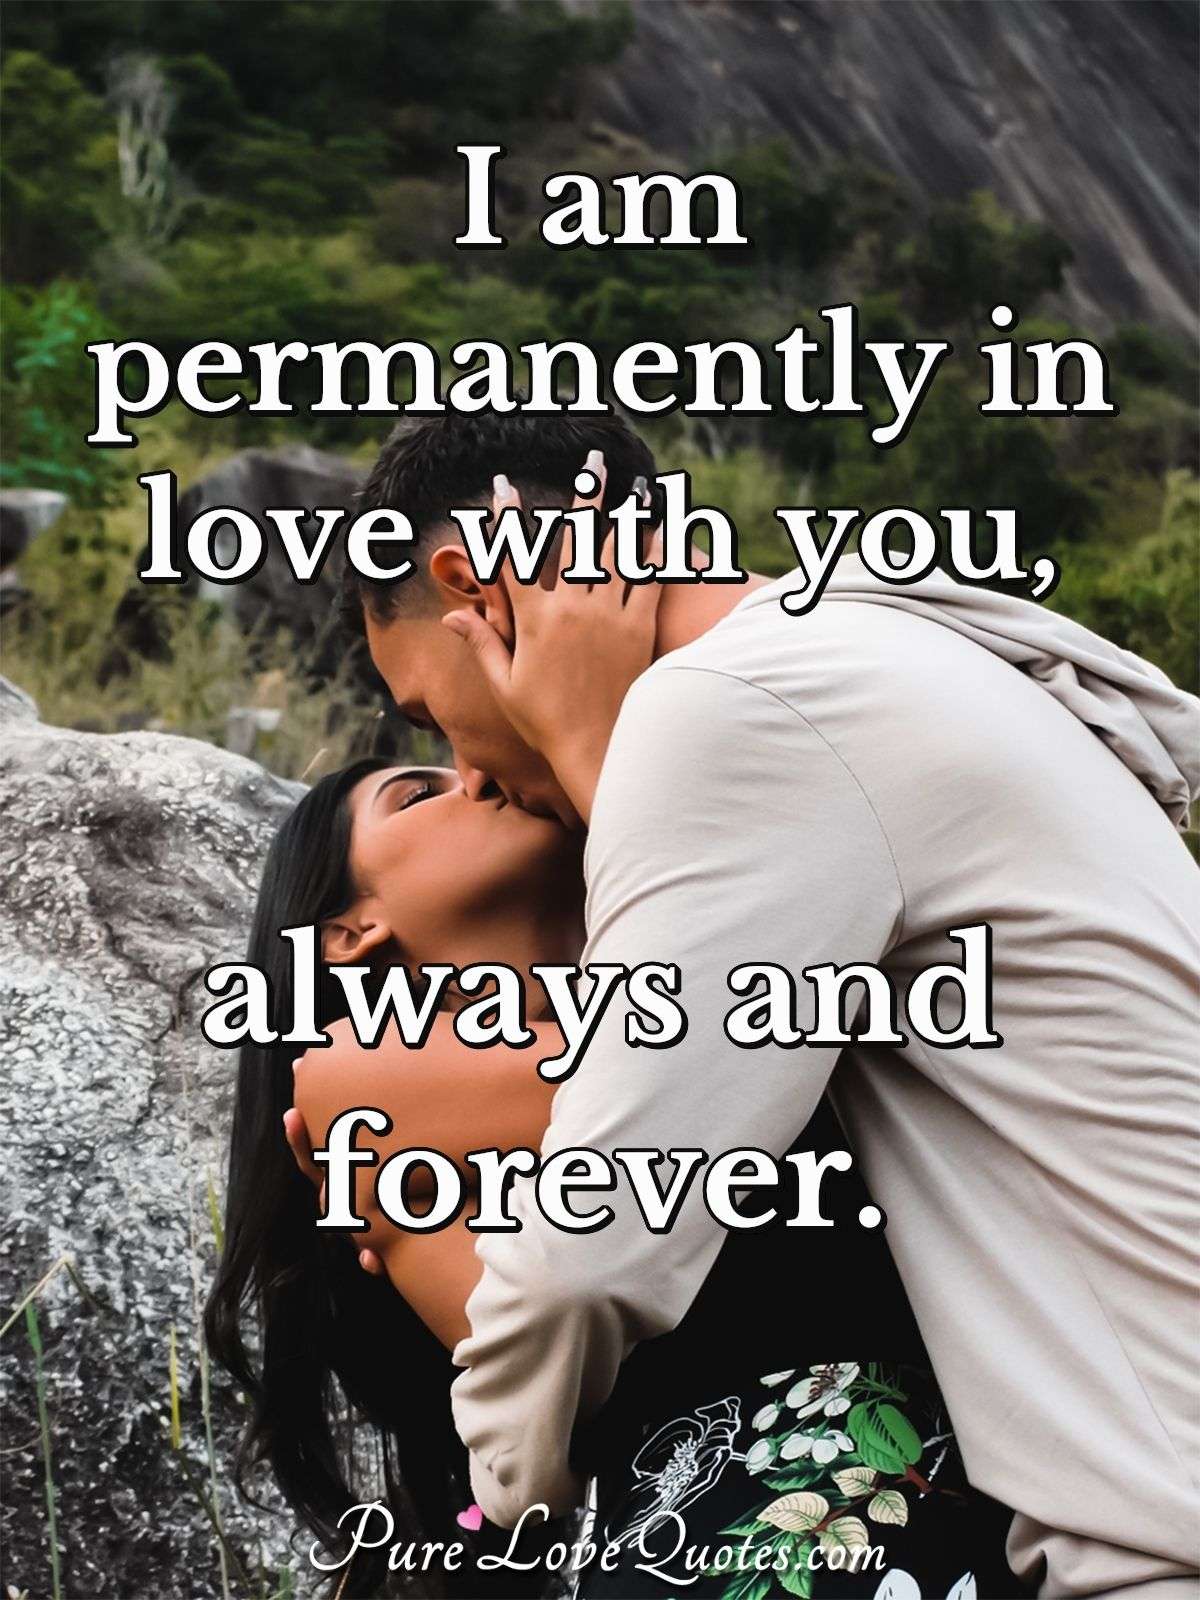 I am permanently in love with you, always and forever. - Anonymous